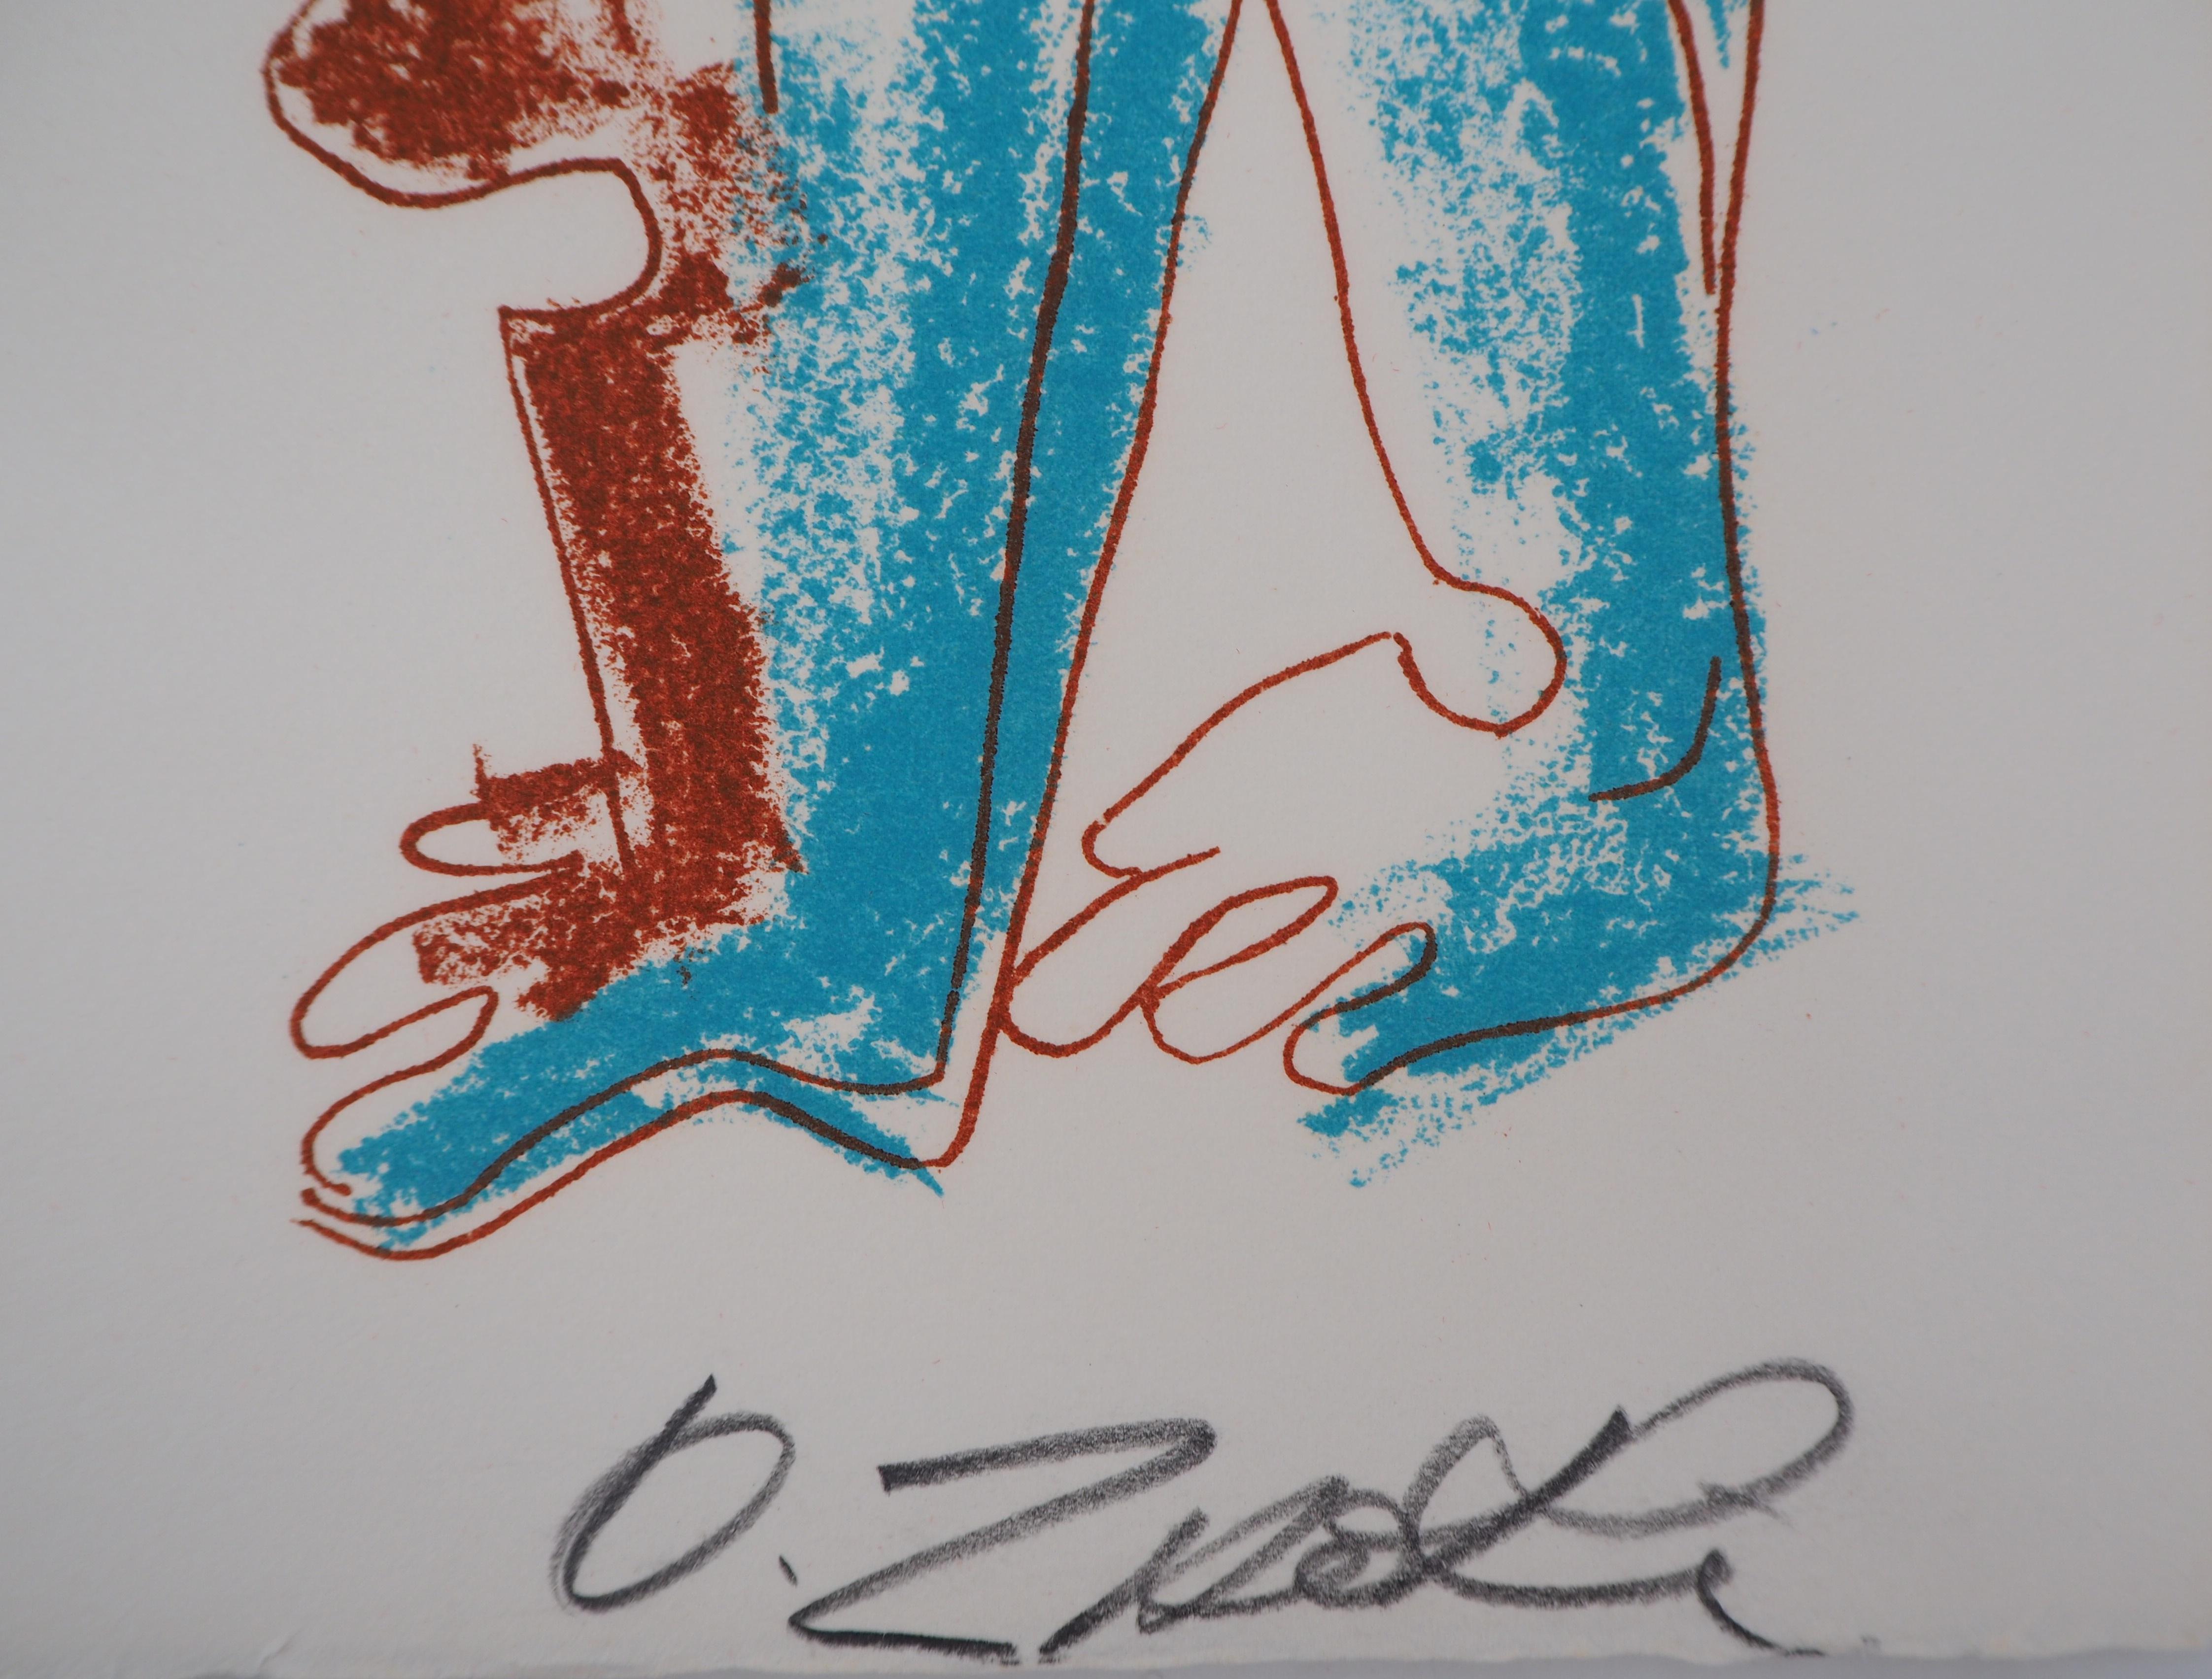 Hugging Couple - Original handsigned lithograph - Print by Ossip Zadkine